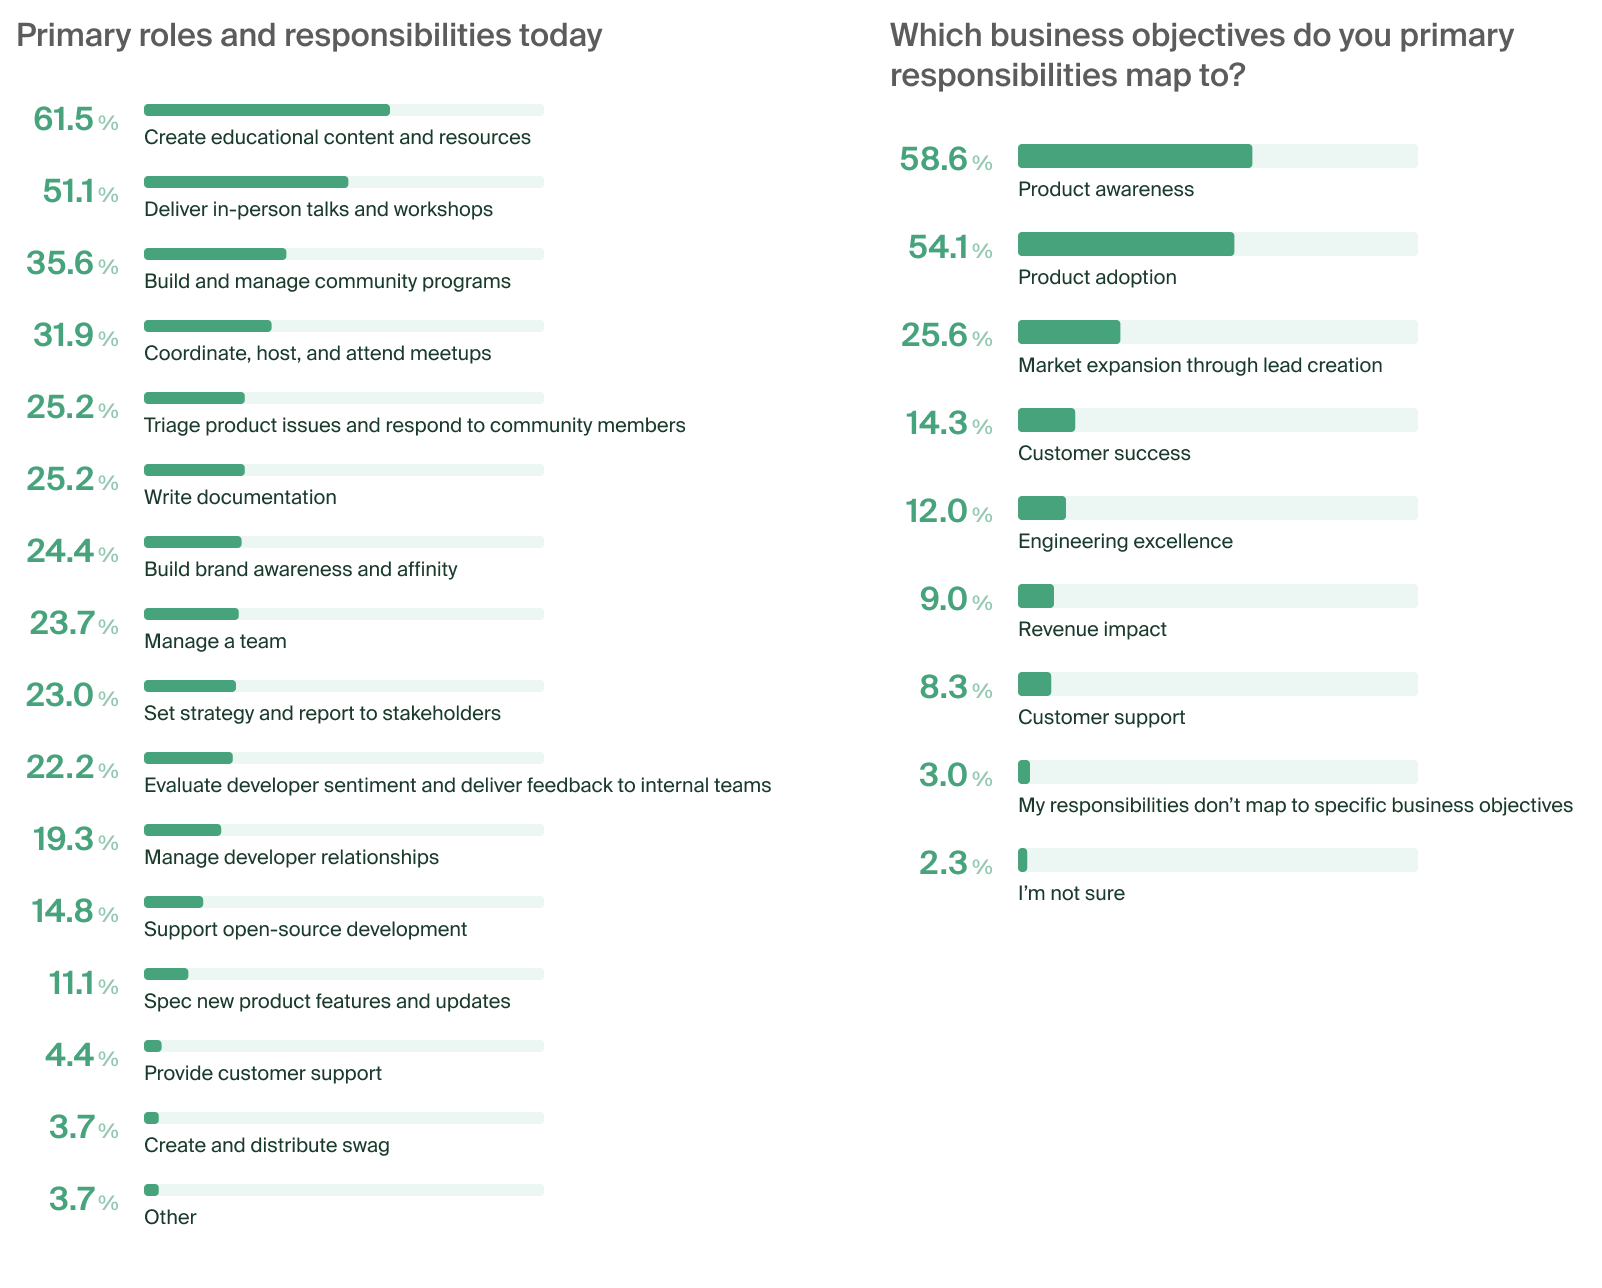 Two charts that depict primary responsibilities and business objectives for DevRel professionals. Creating educational content and resources tops the list of primary responsibilities at 61.5%